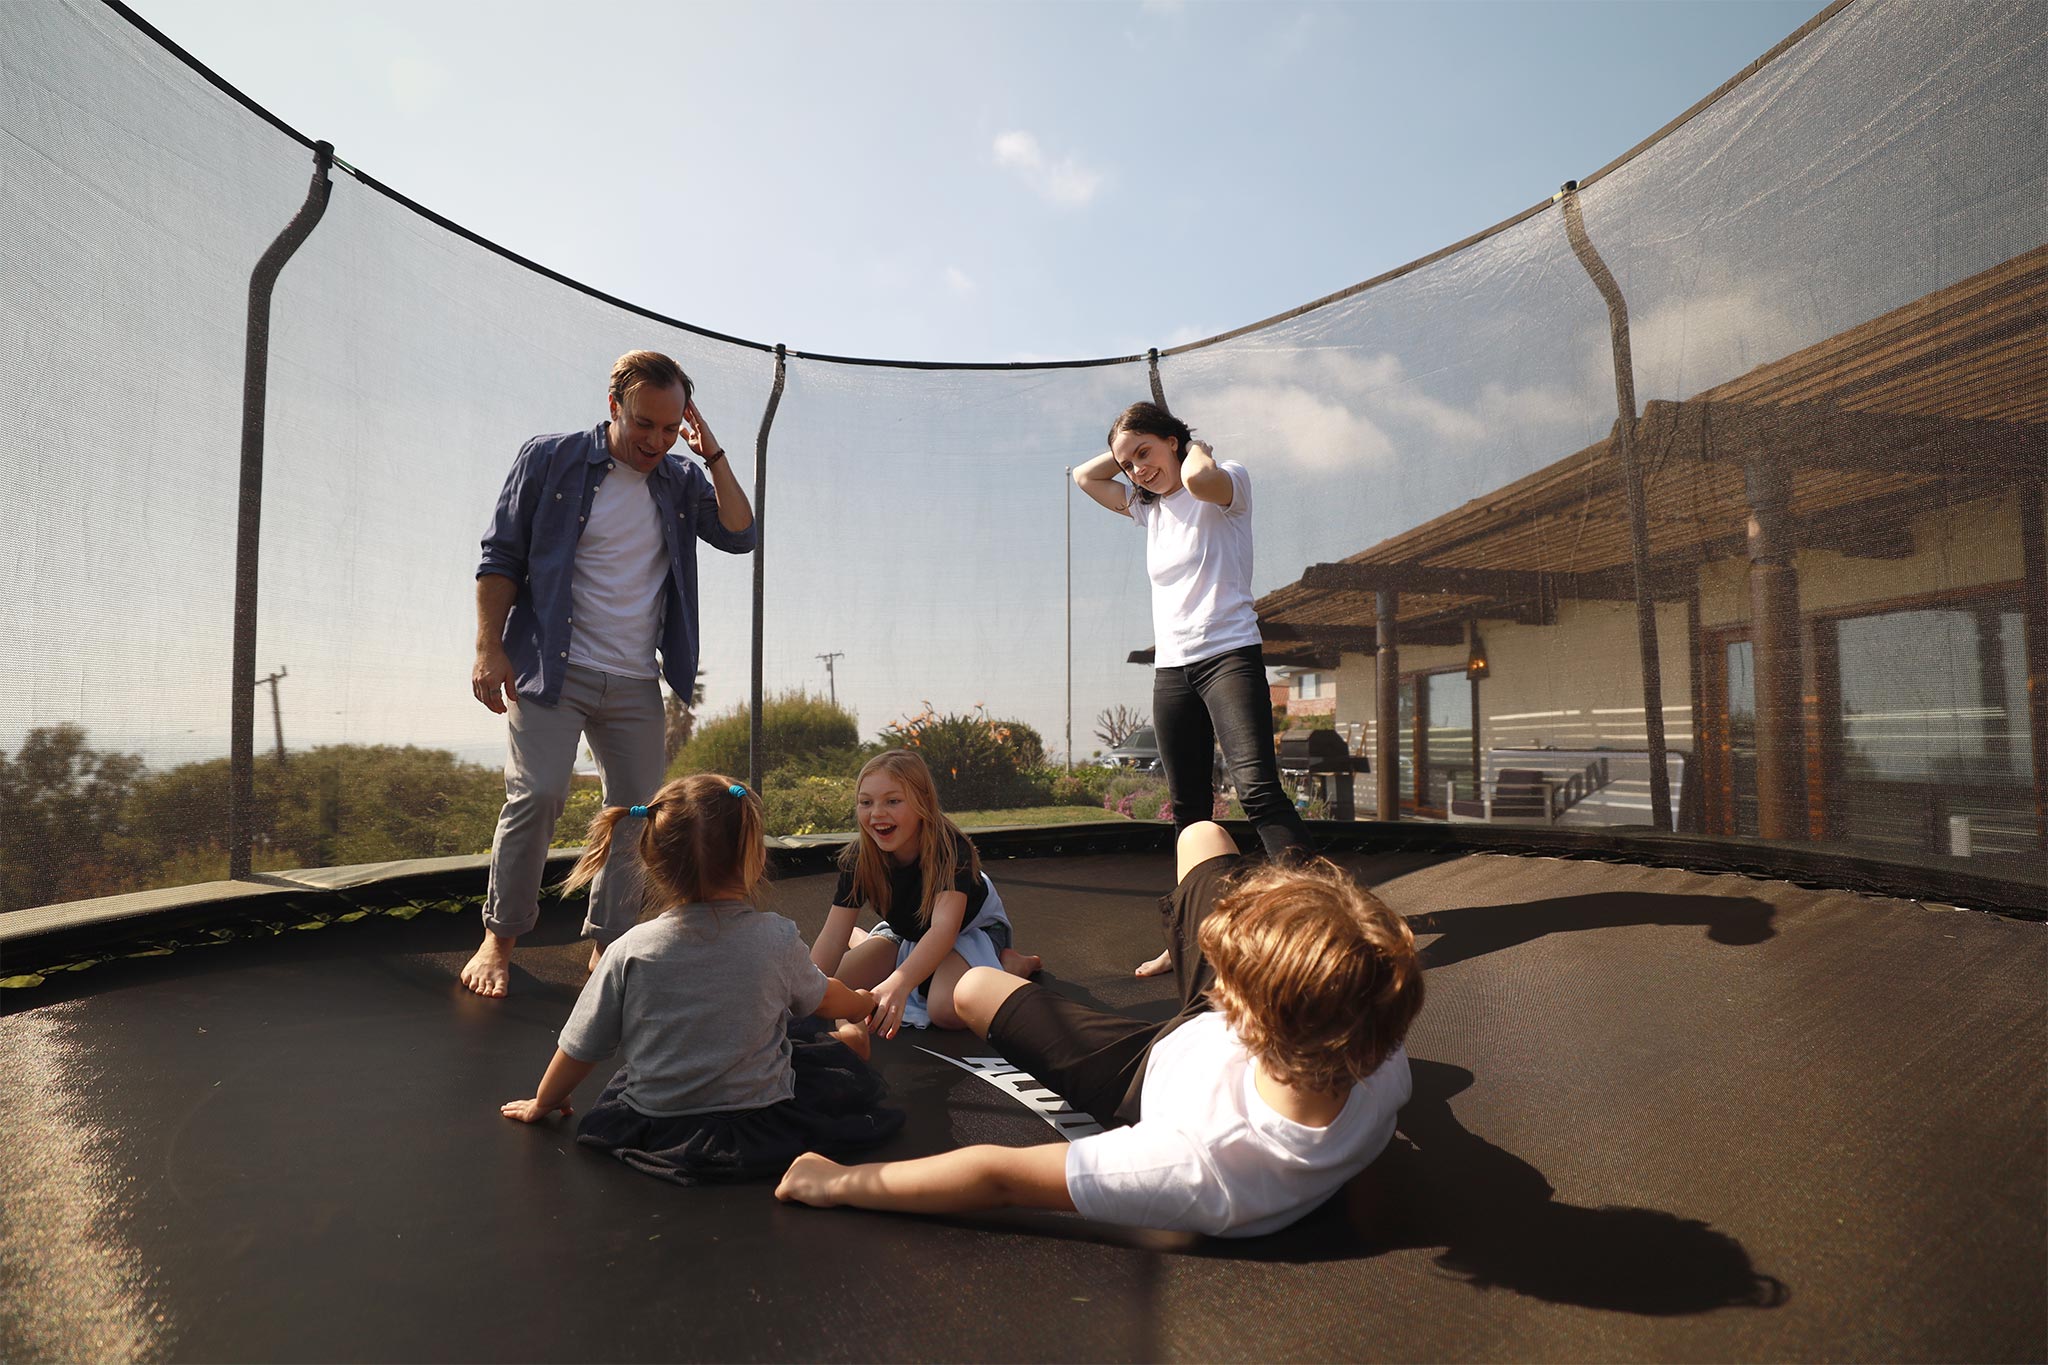 Family having fun together on a trampoline